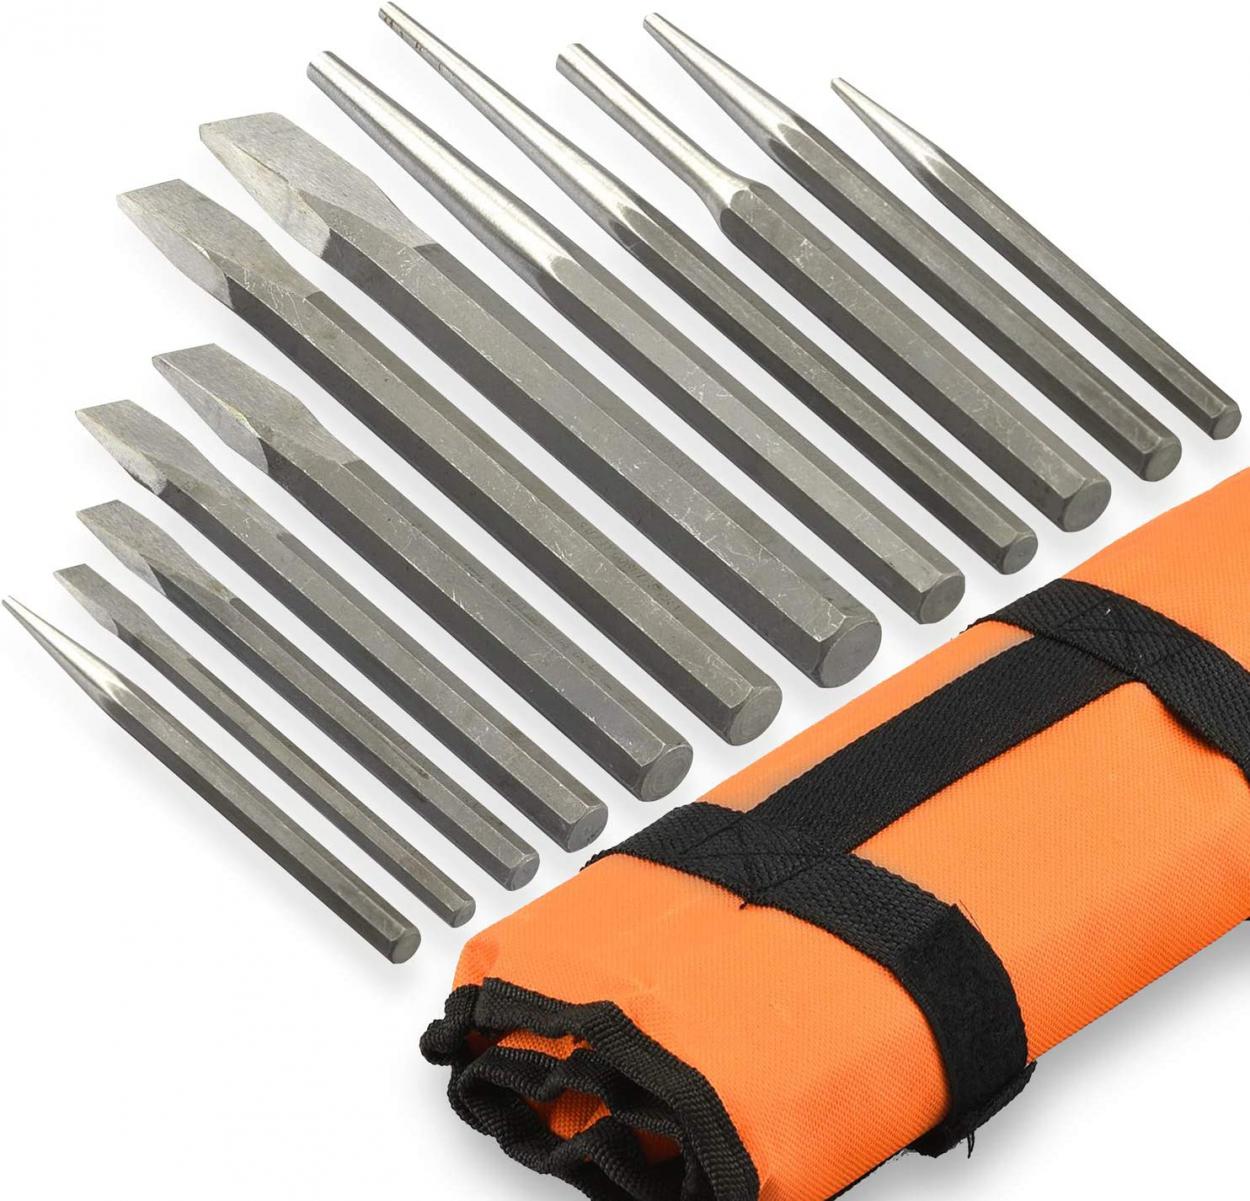 12 Piece Heavy Duty Punch and Chisel Set by NEIKO